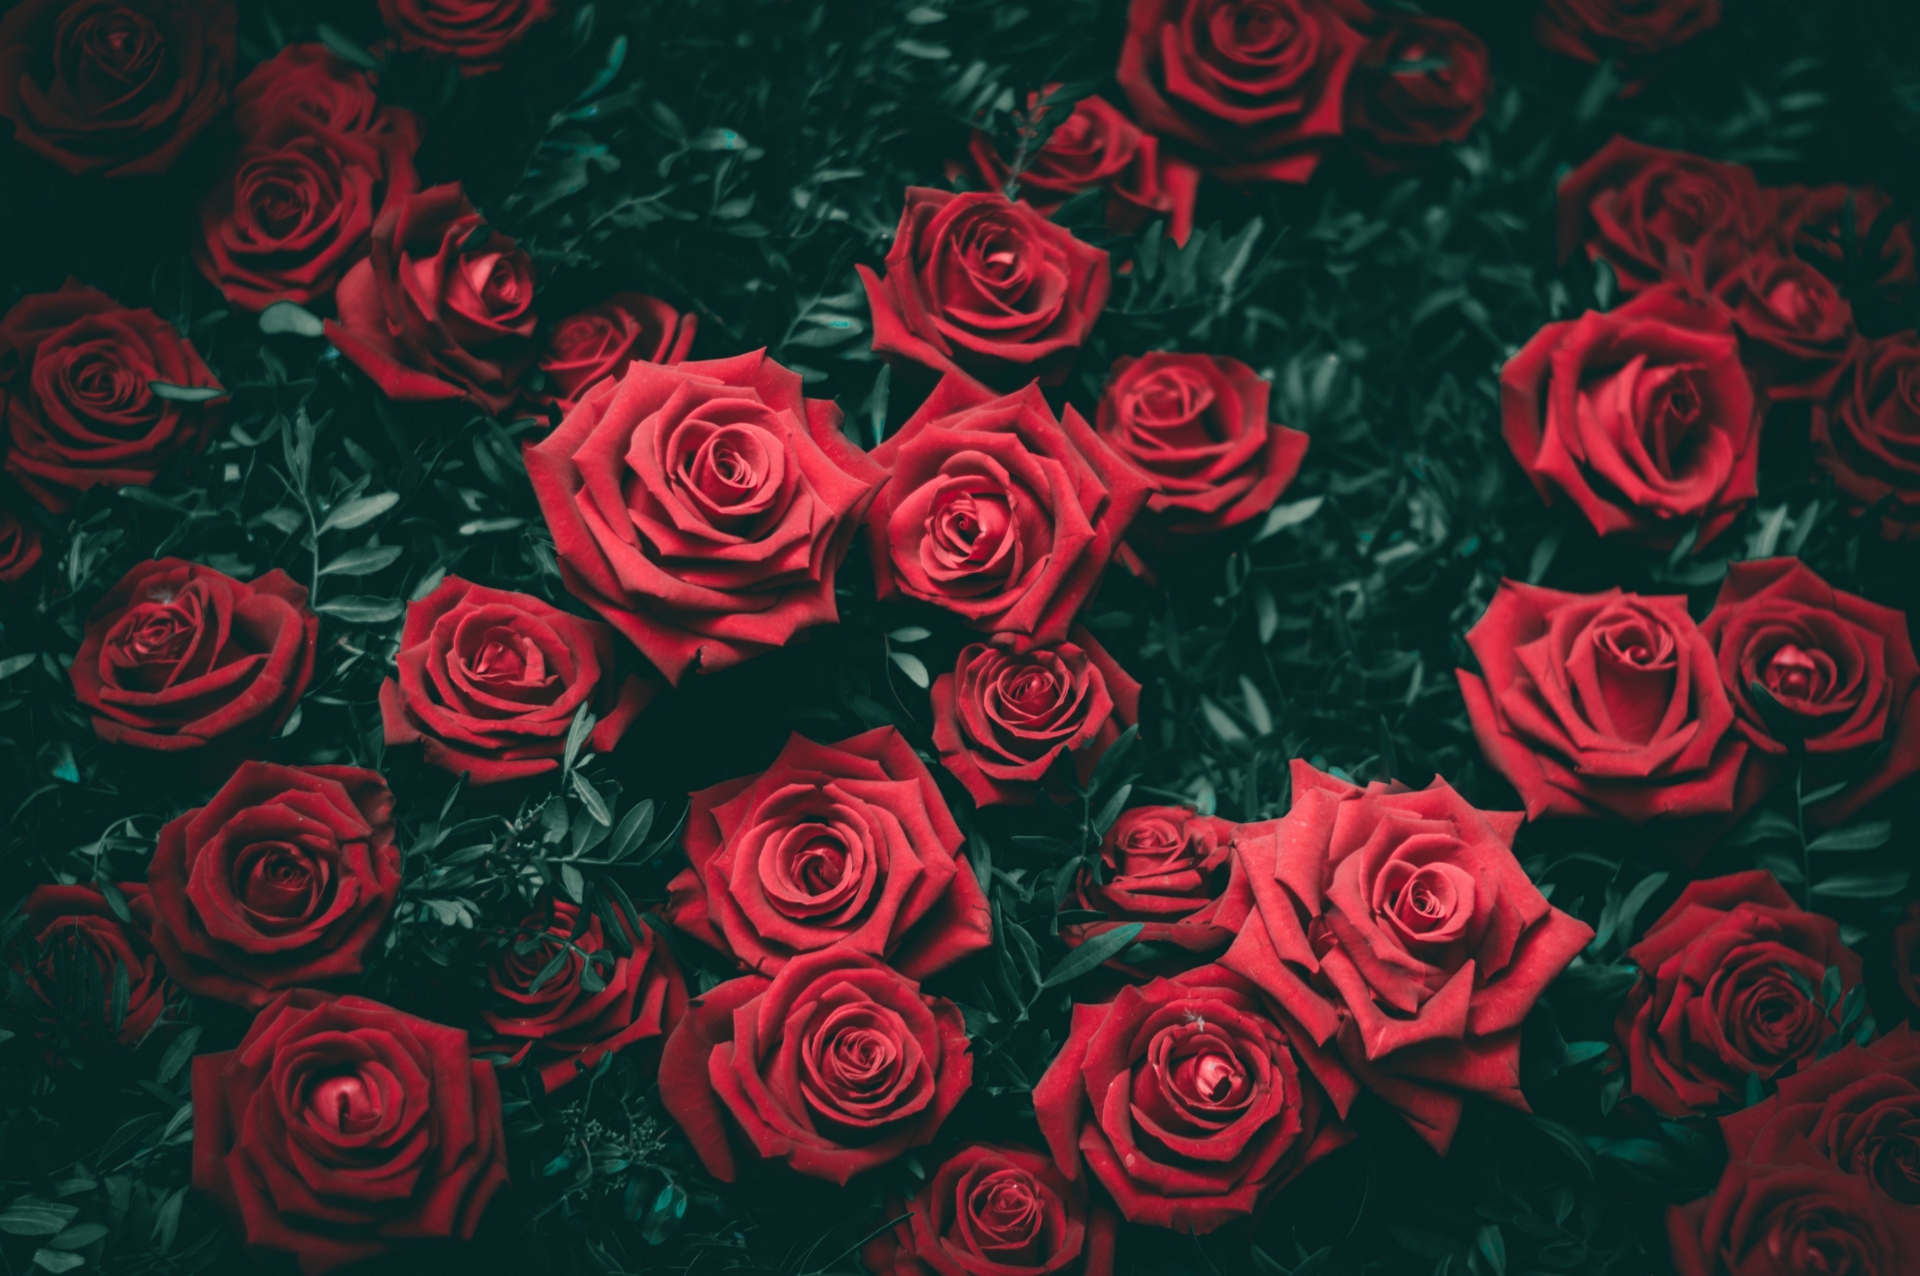 12 Amazing Facts about Roses You may not Know